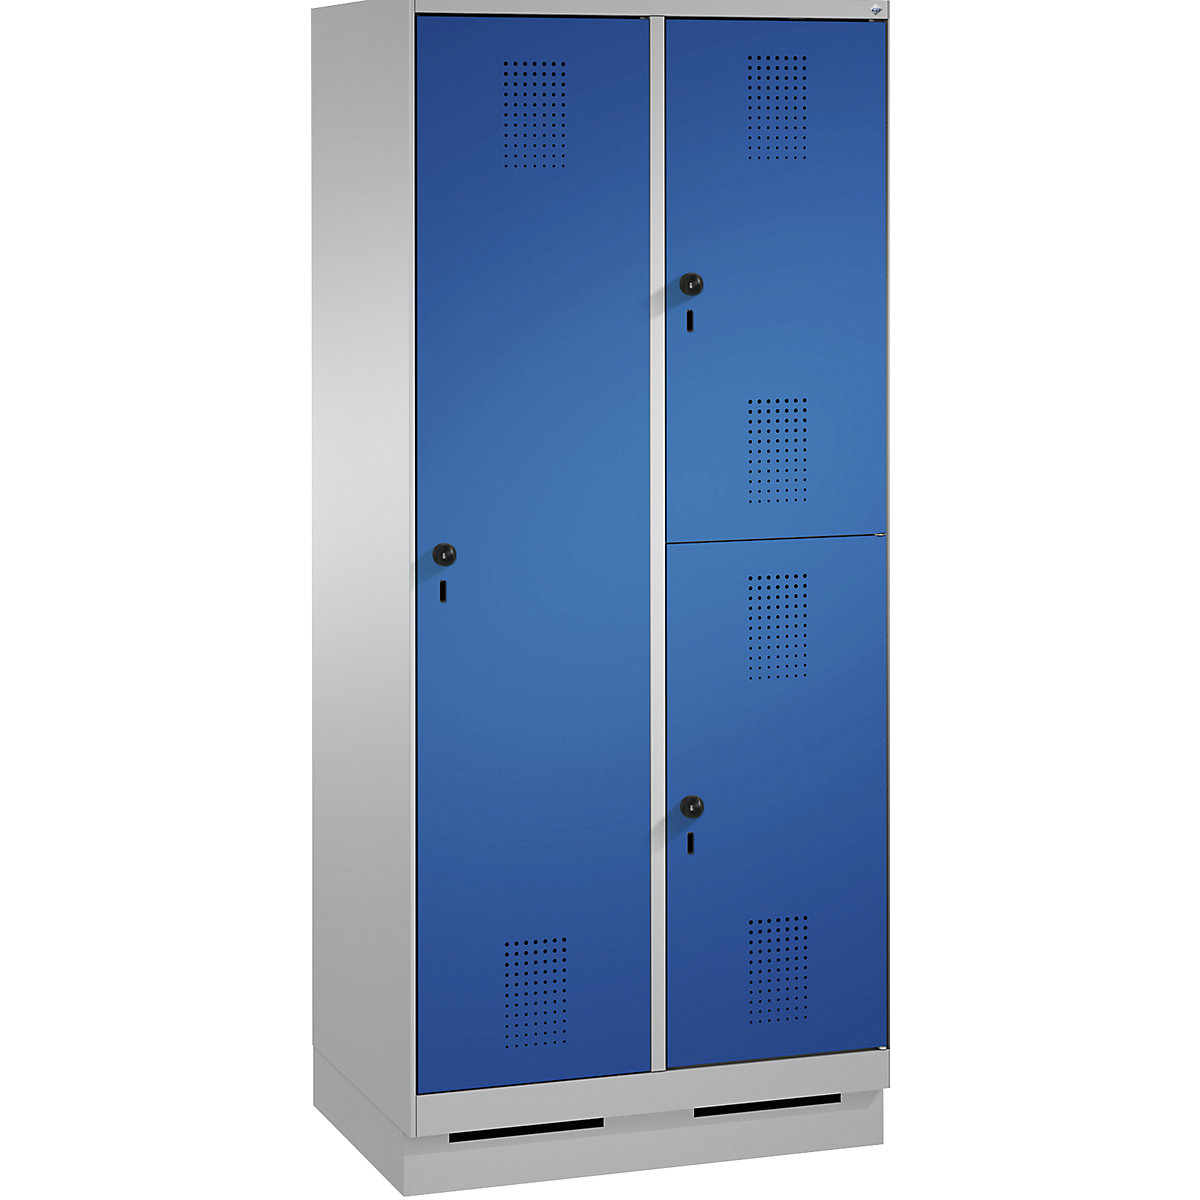 EVOLO combination cupboard, single and double tier – C+P, 2 compartments, 3 doors, compartment width 400 mm, with plinth, white aluminium / gentian blue